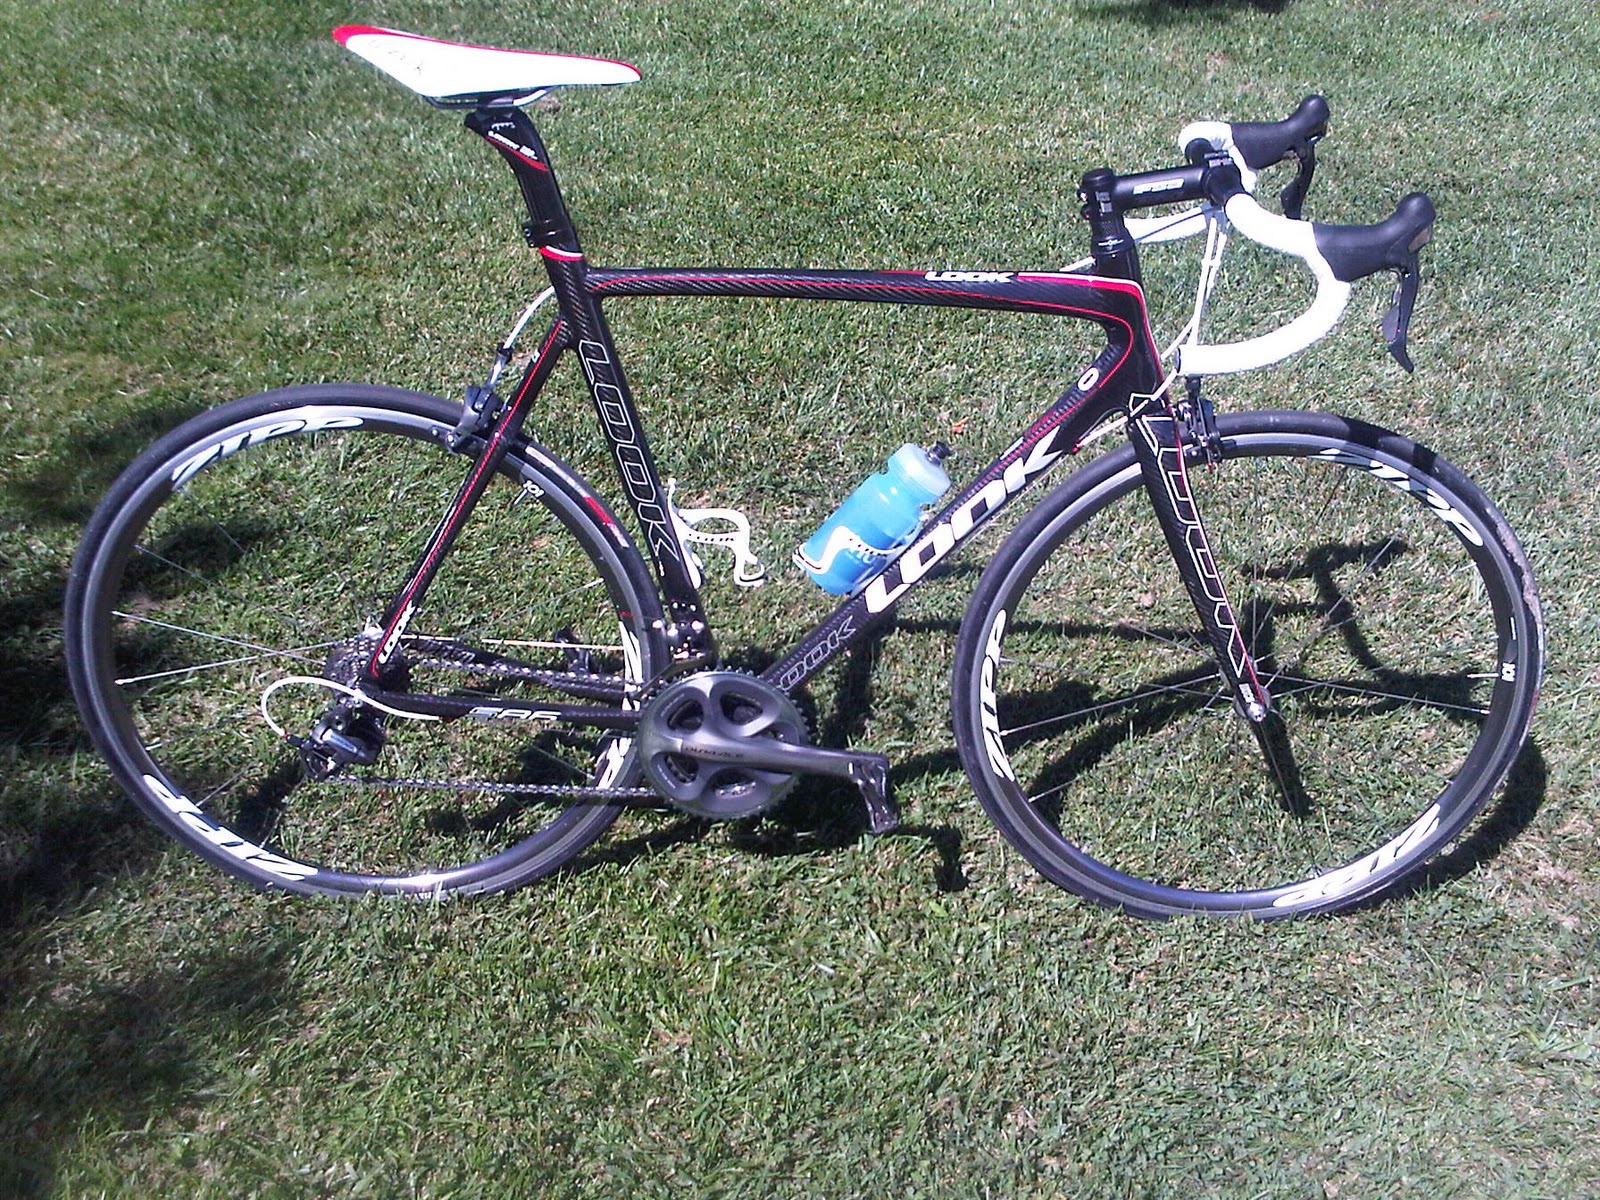 R & A Cycles Blog: Levi's Gran Fondo: 65 miles on the 2011 Look 586 RSP